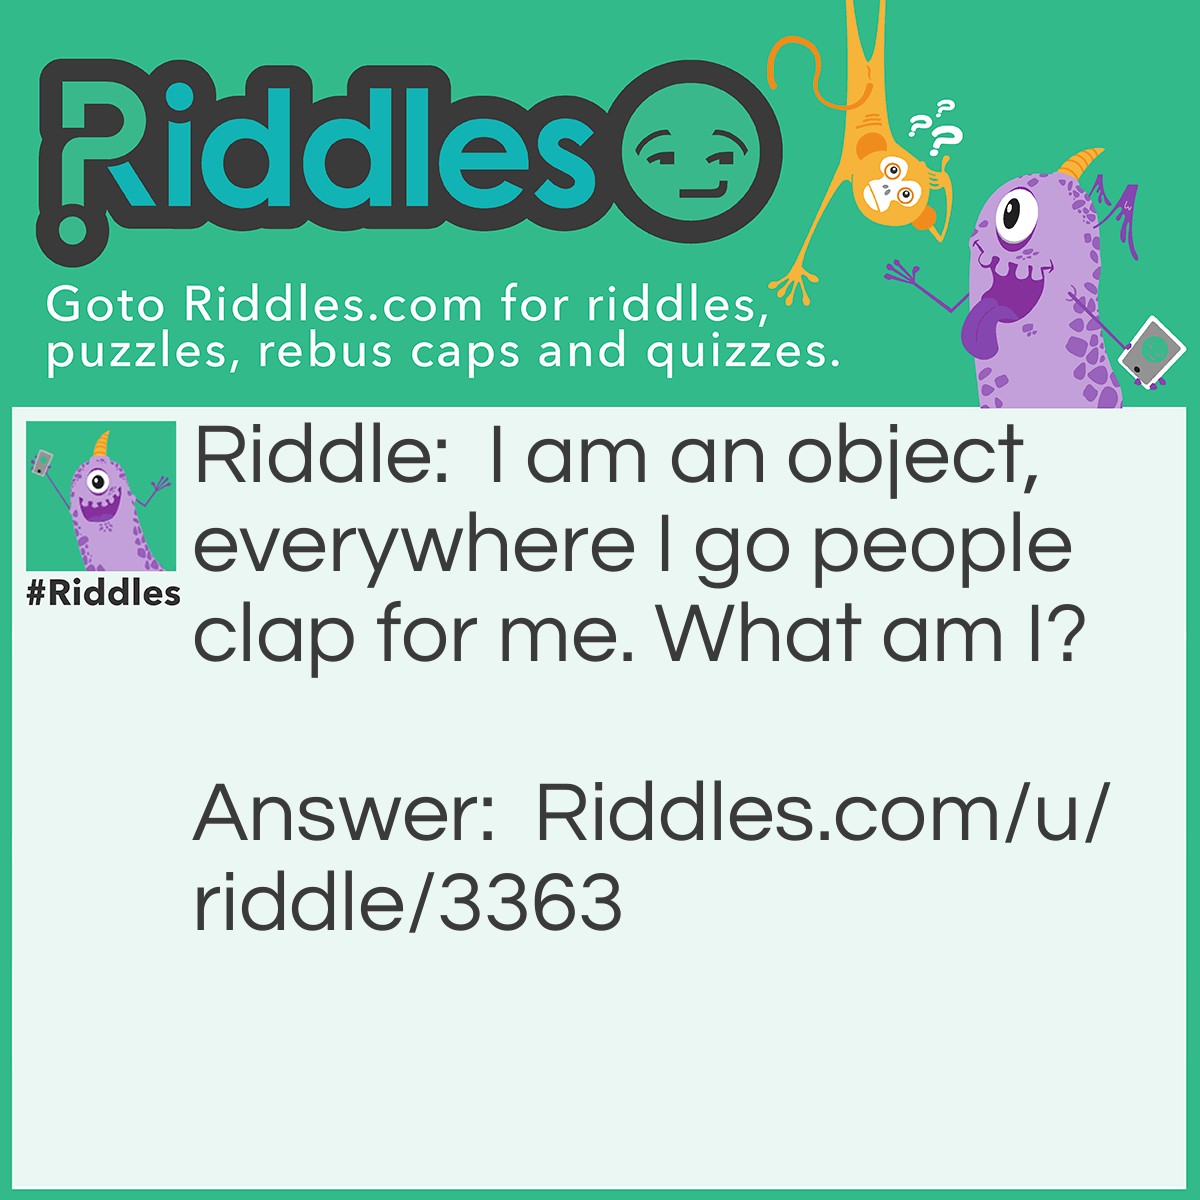 Riddle: I am an object, everywhere I go people clap for me. What am I? Answer: A mosquito!